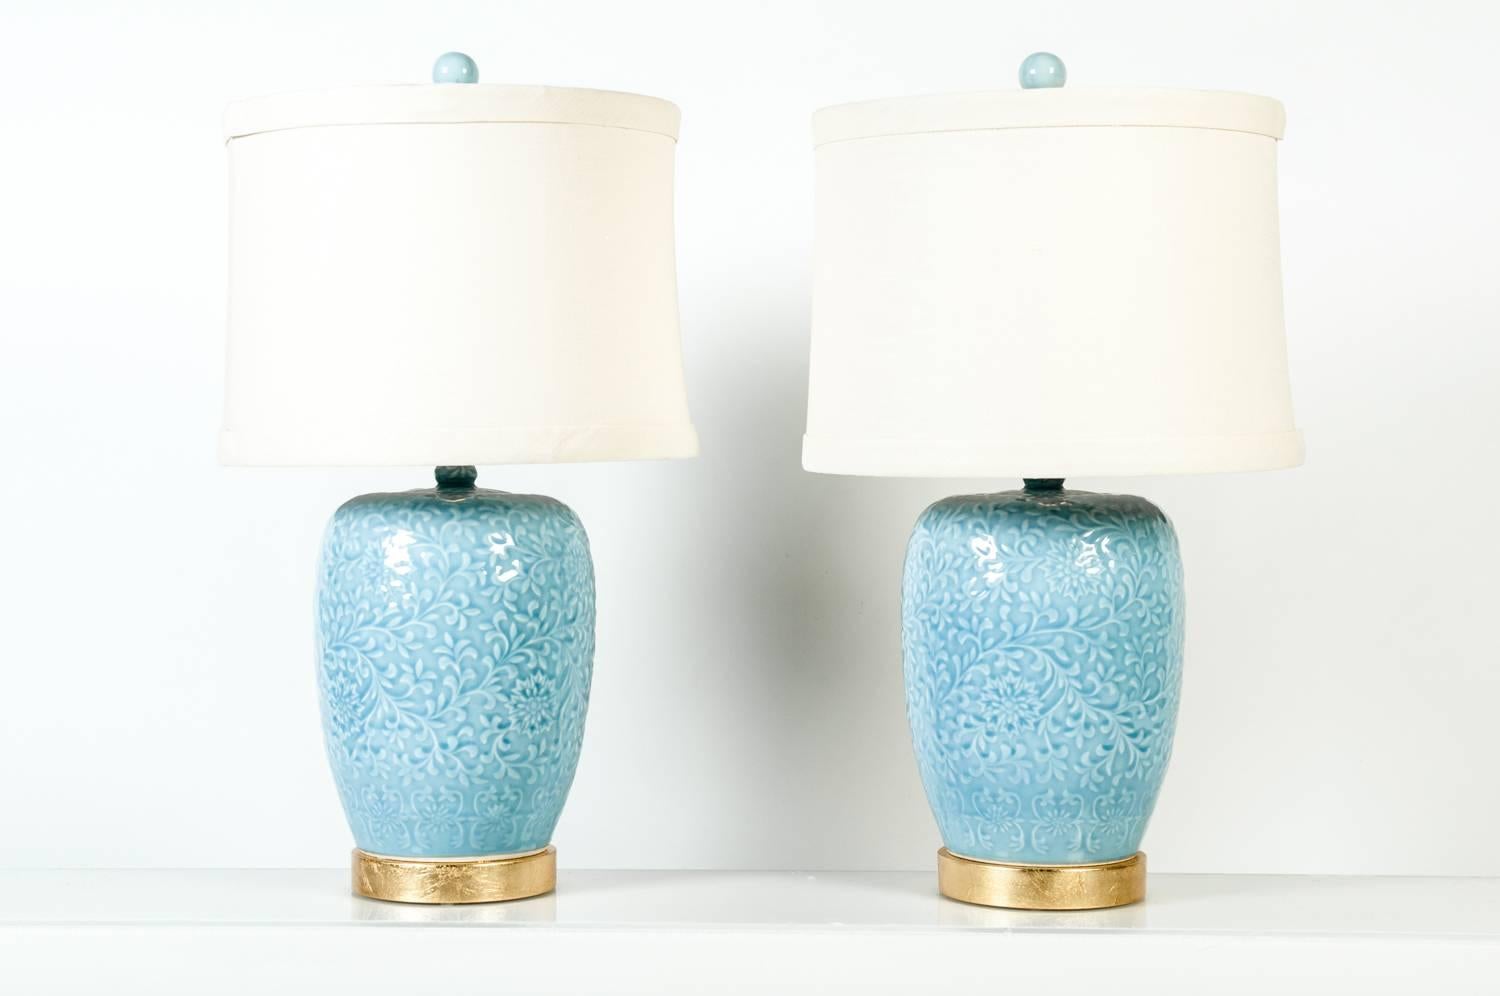 Pair of powdered blue porcelain task / table lamps with subtle vine and floral design underglaze with gilt brass base , and matching finials. Each lamp sit on a wooden gilt base. Each lamp measure 26.5 inches tall with finial x 8.5 inches wide in